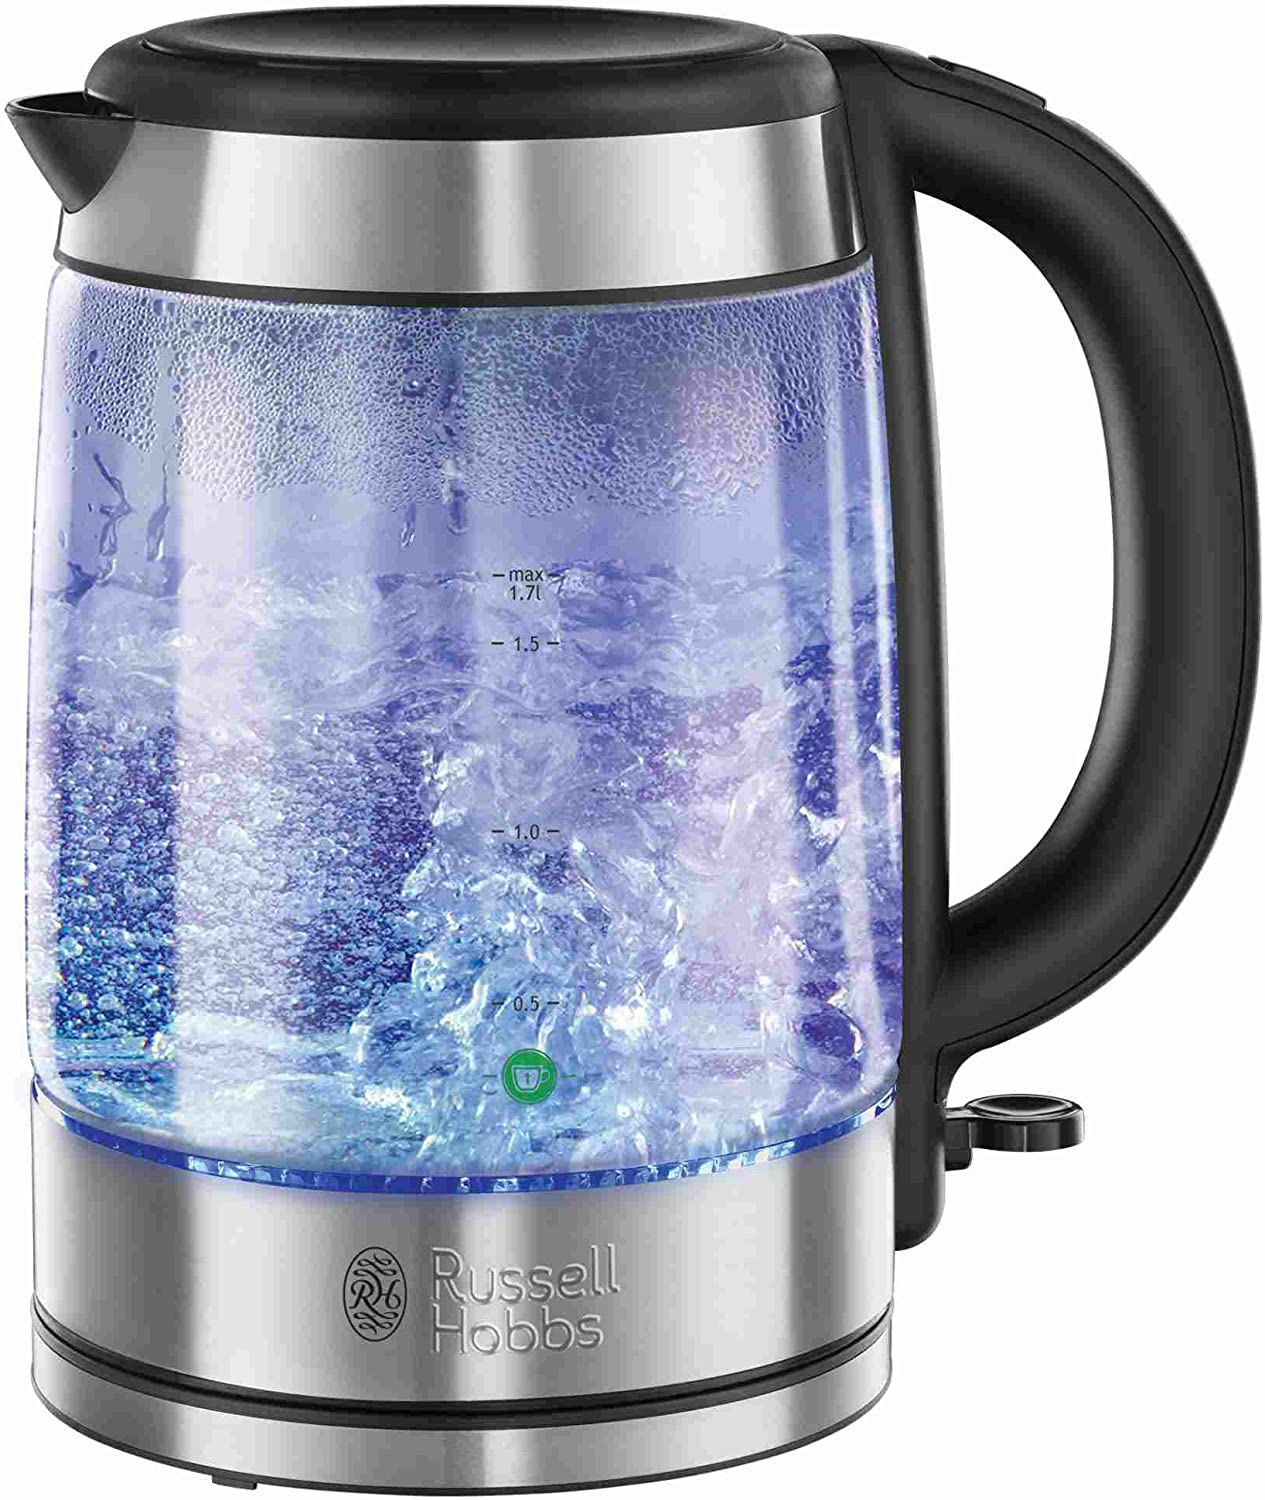 Russell Hobbs Kettle, Glass, 1.7 L, 2200 W, LED Lighting, 1-Cup Option, Stainless Steel, Removable Limescale Filter, Water Level with Capacity Marking, Tea Maker 21600-57